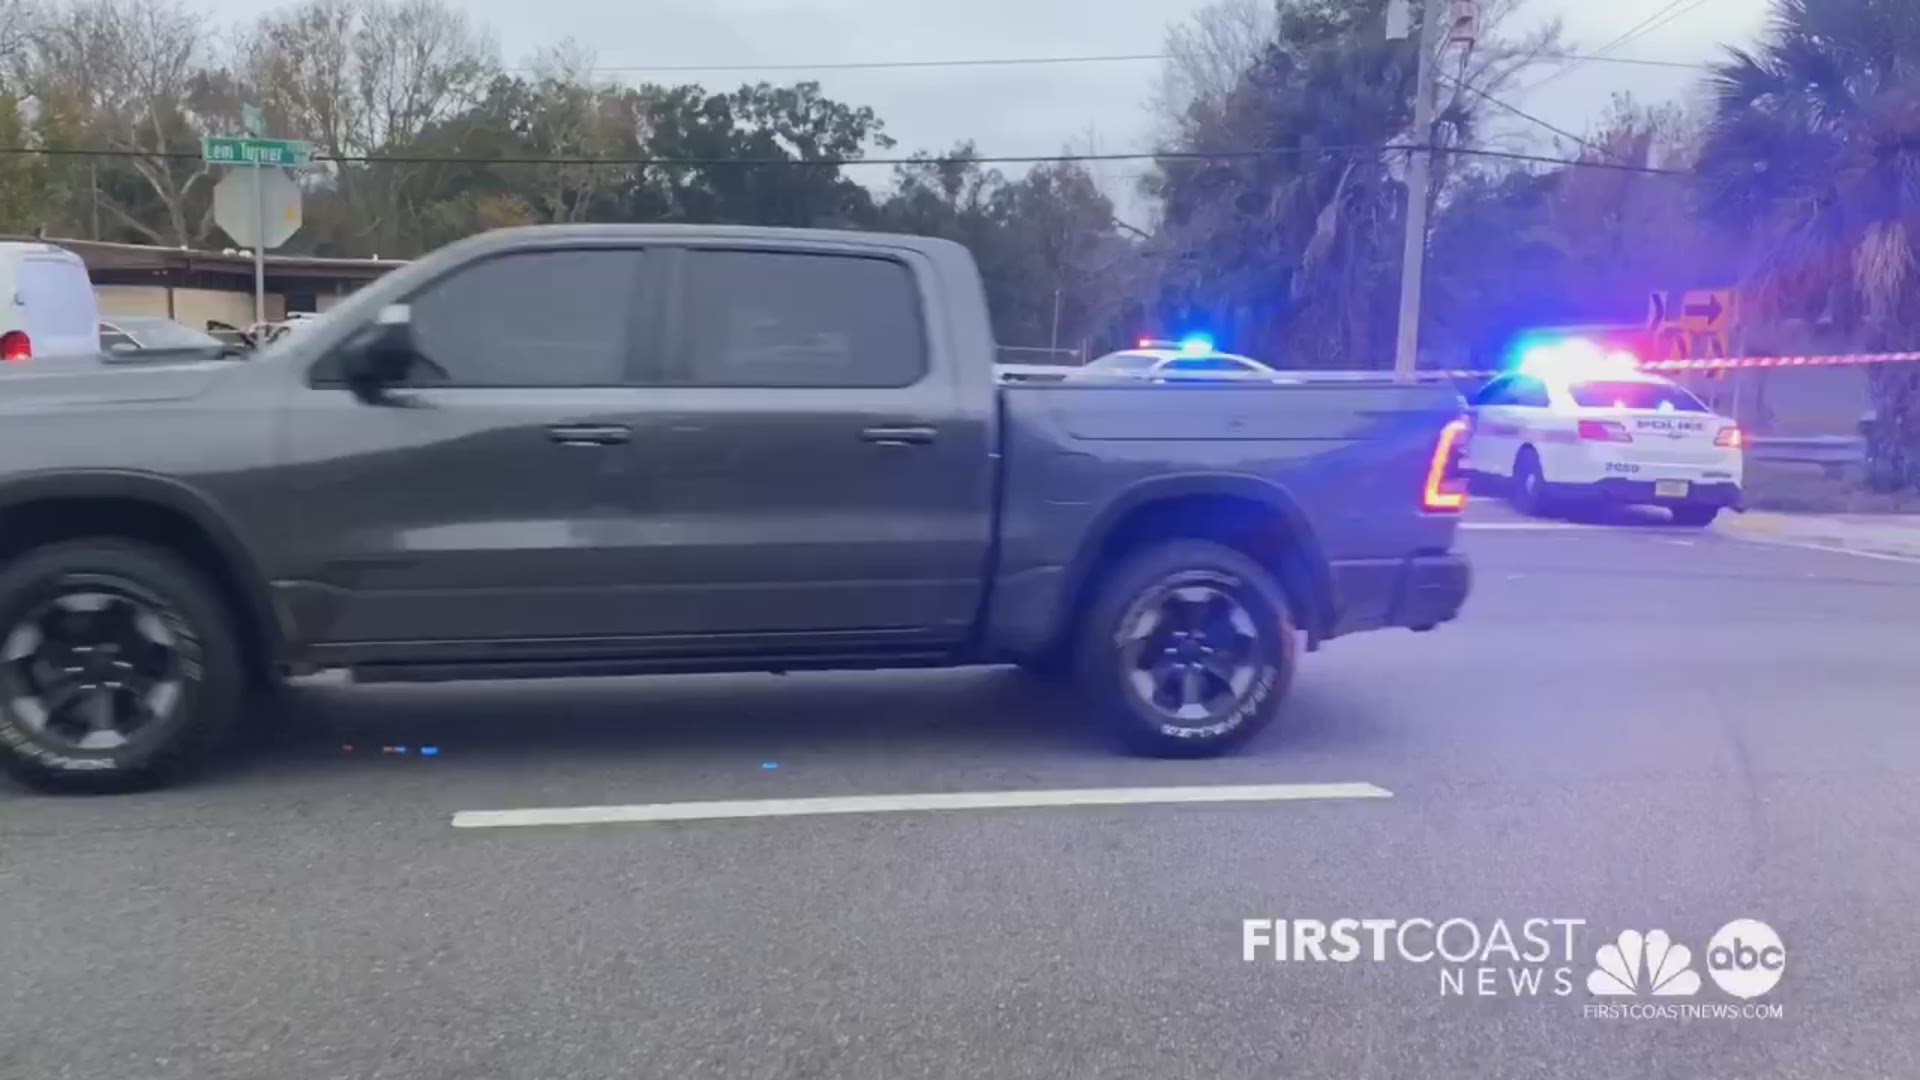 JSO says there are no major road closures in the area, but First Coast News crews see dozens of police vehicles on the scene, as well as JFRD crews.